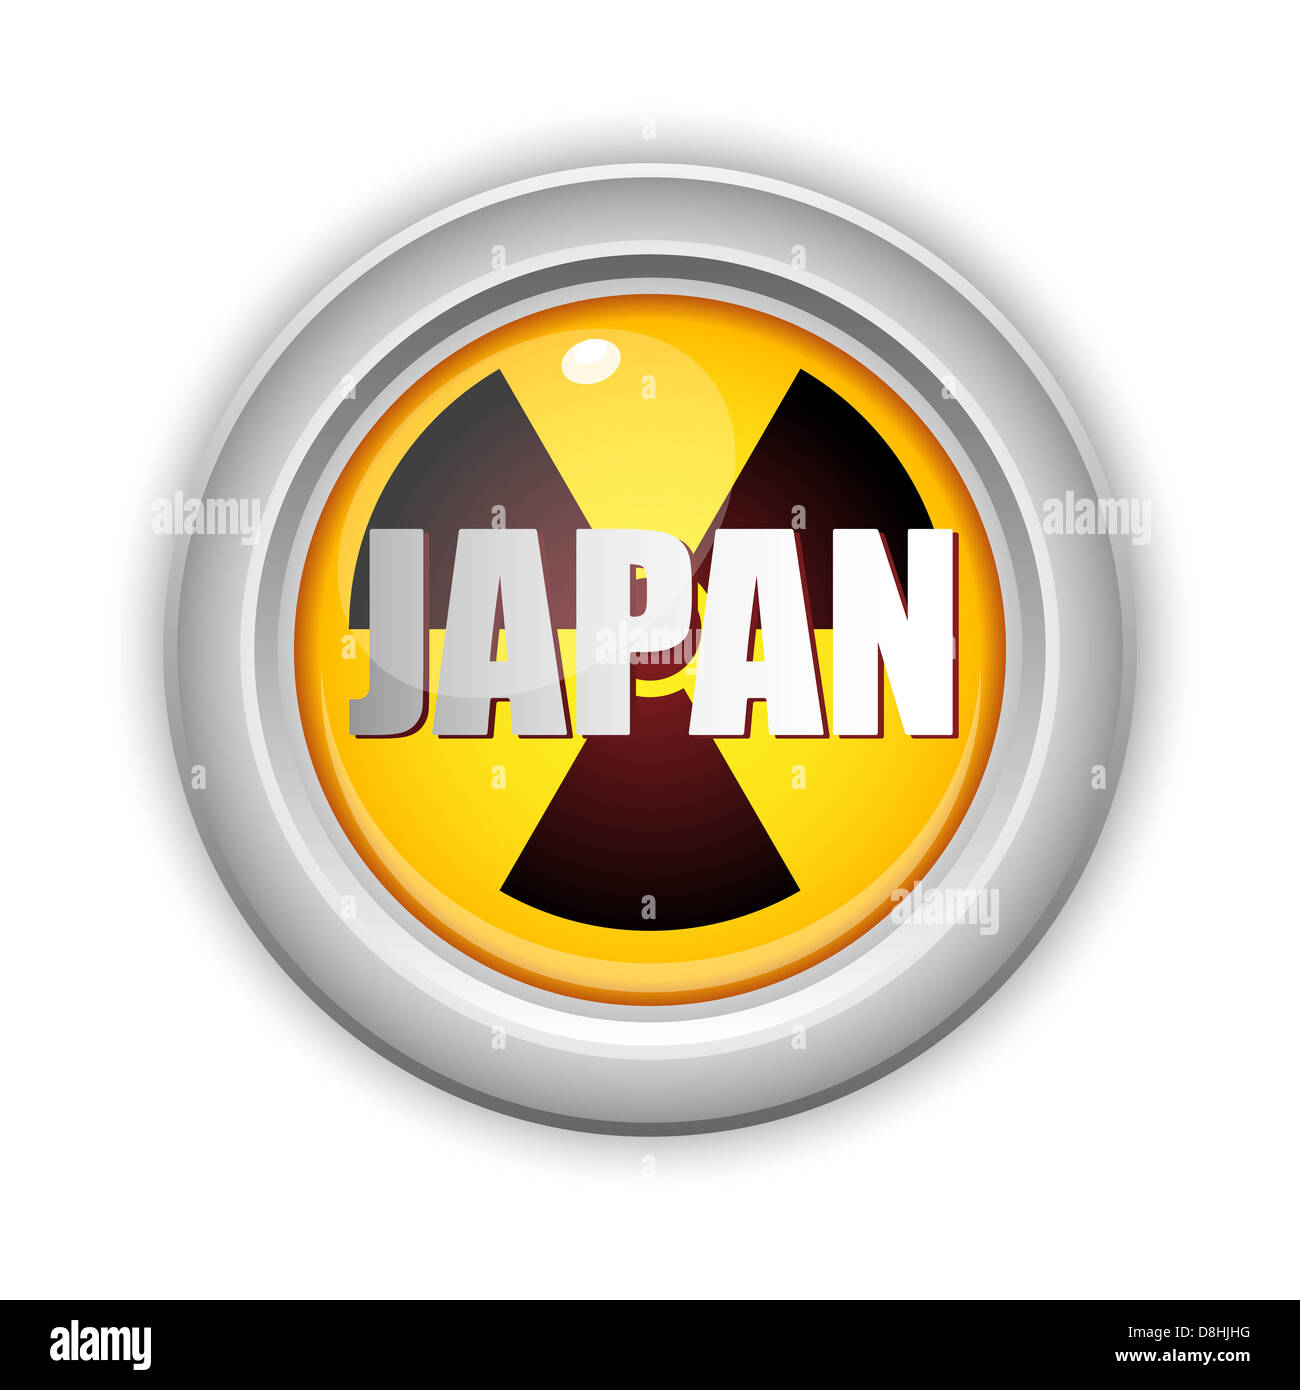 Vector - Japan Nuclear Disaster Yellow Button Stock Photo